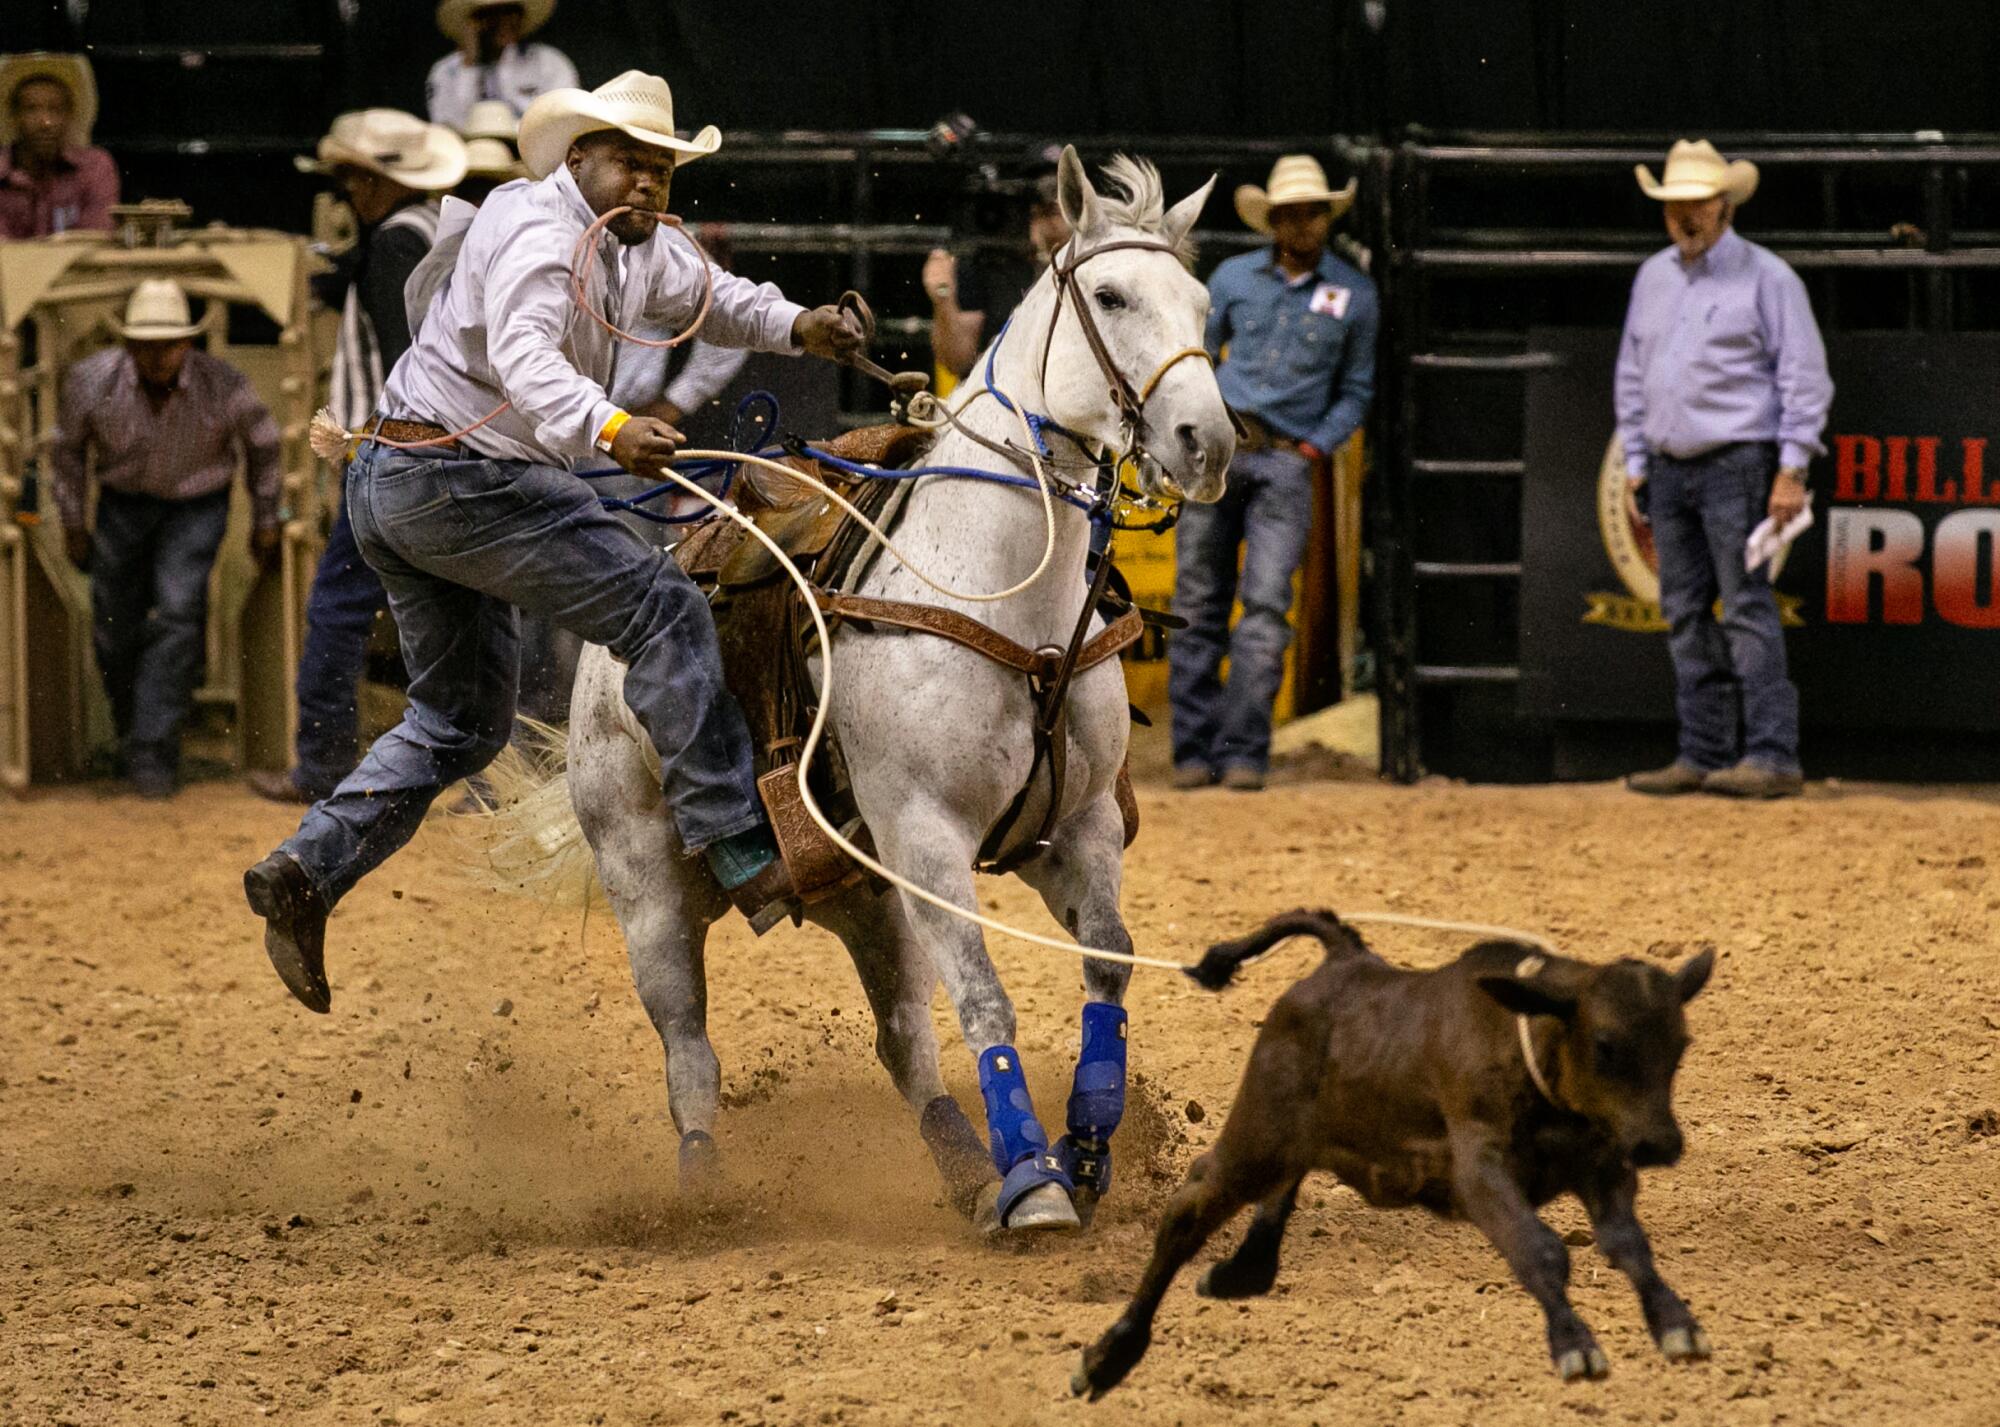 A cowboy jumps off his horse and runs after a lassoed calf in the calf roping competition.